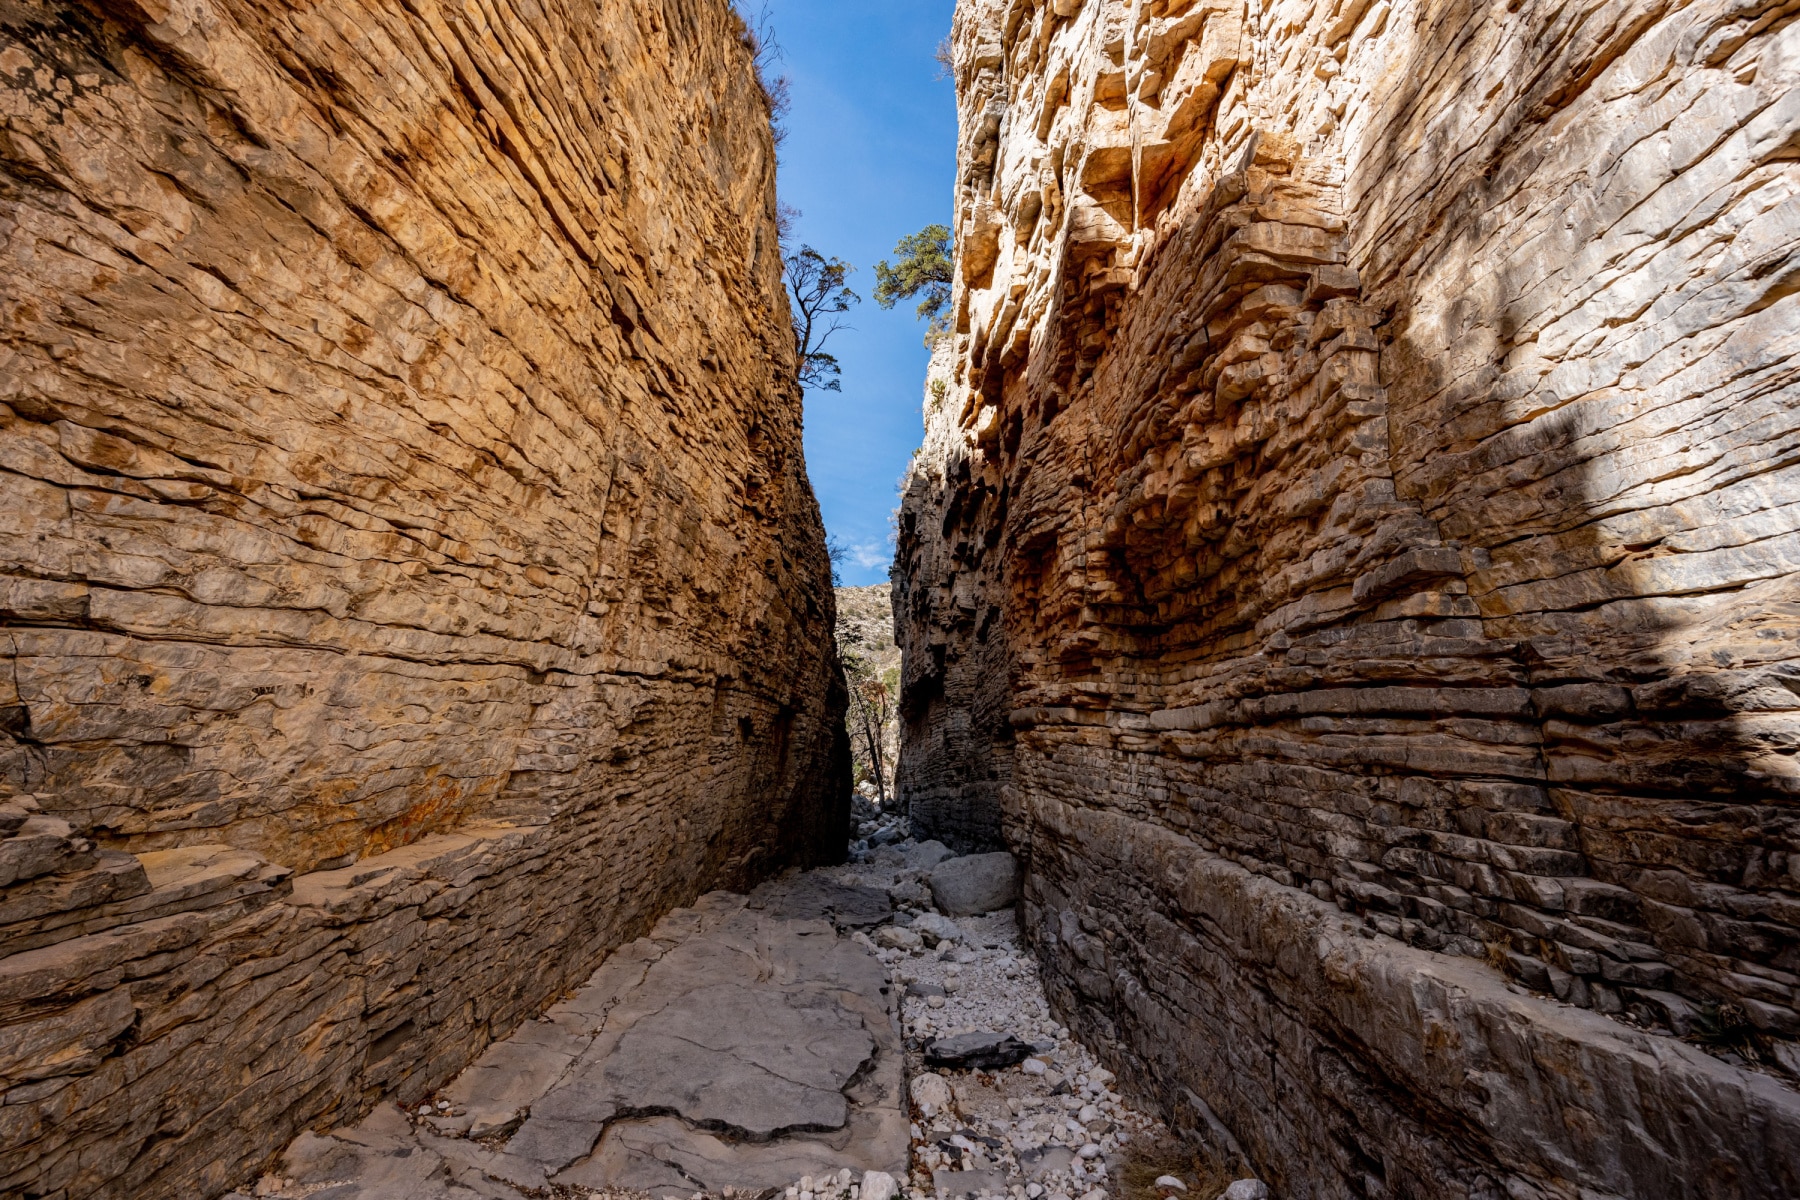 The layered and narrow walls of Devil's Hall, one of the best Guadalupe Mountains National Park hikes.